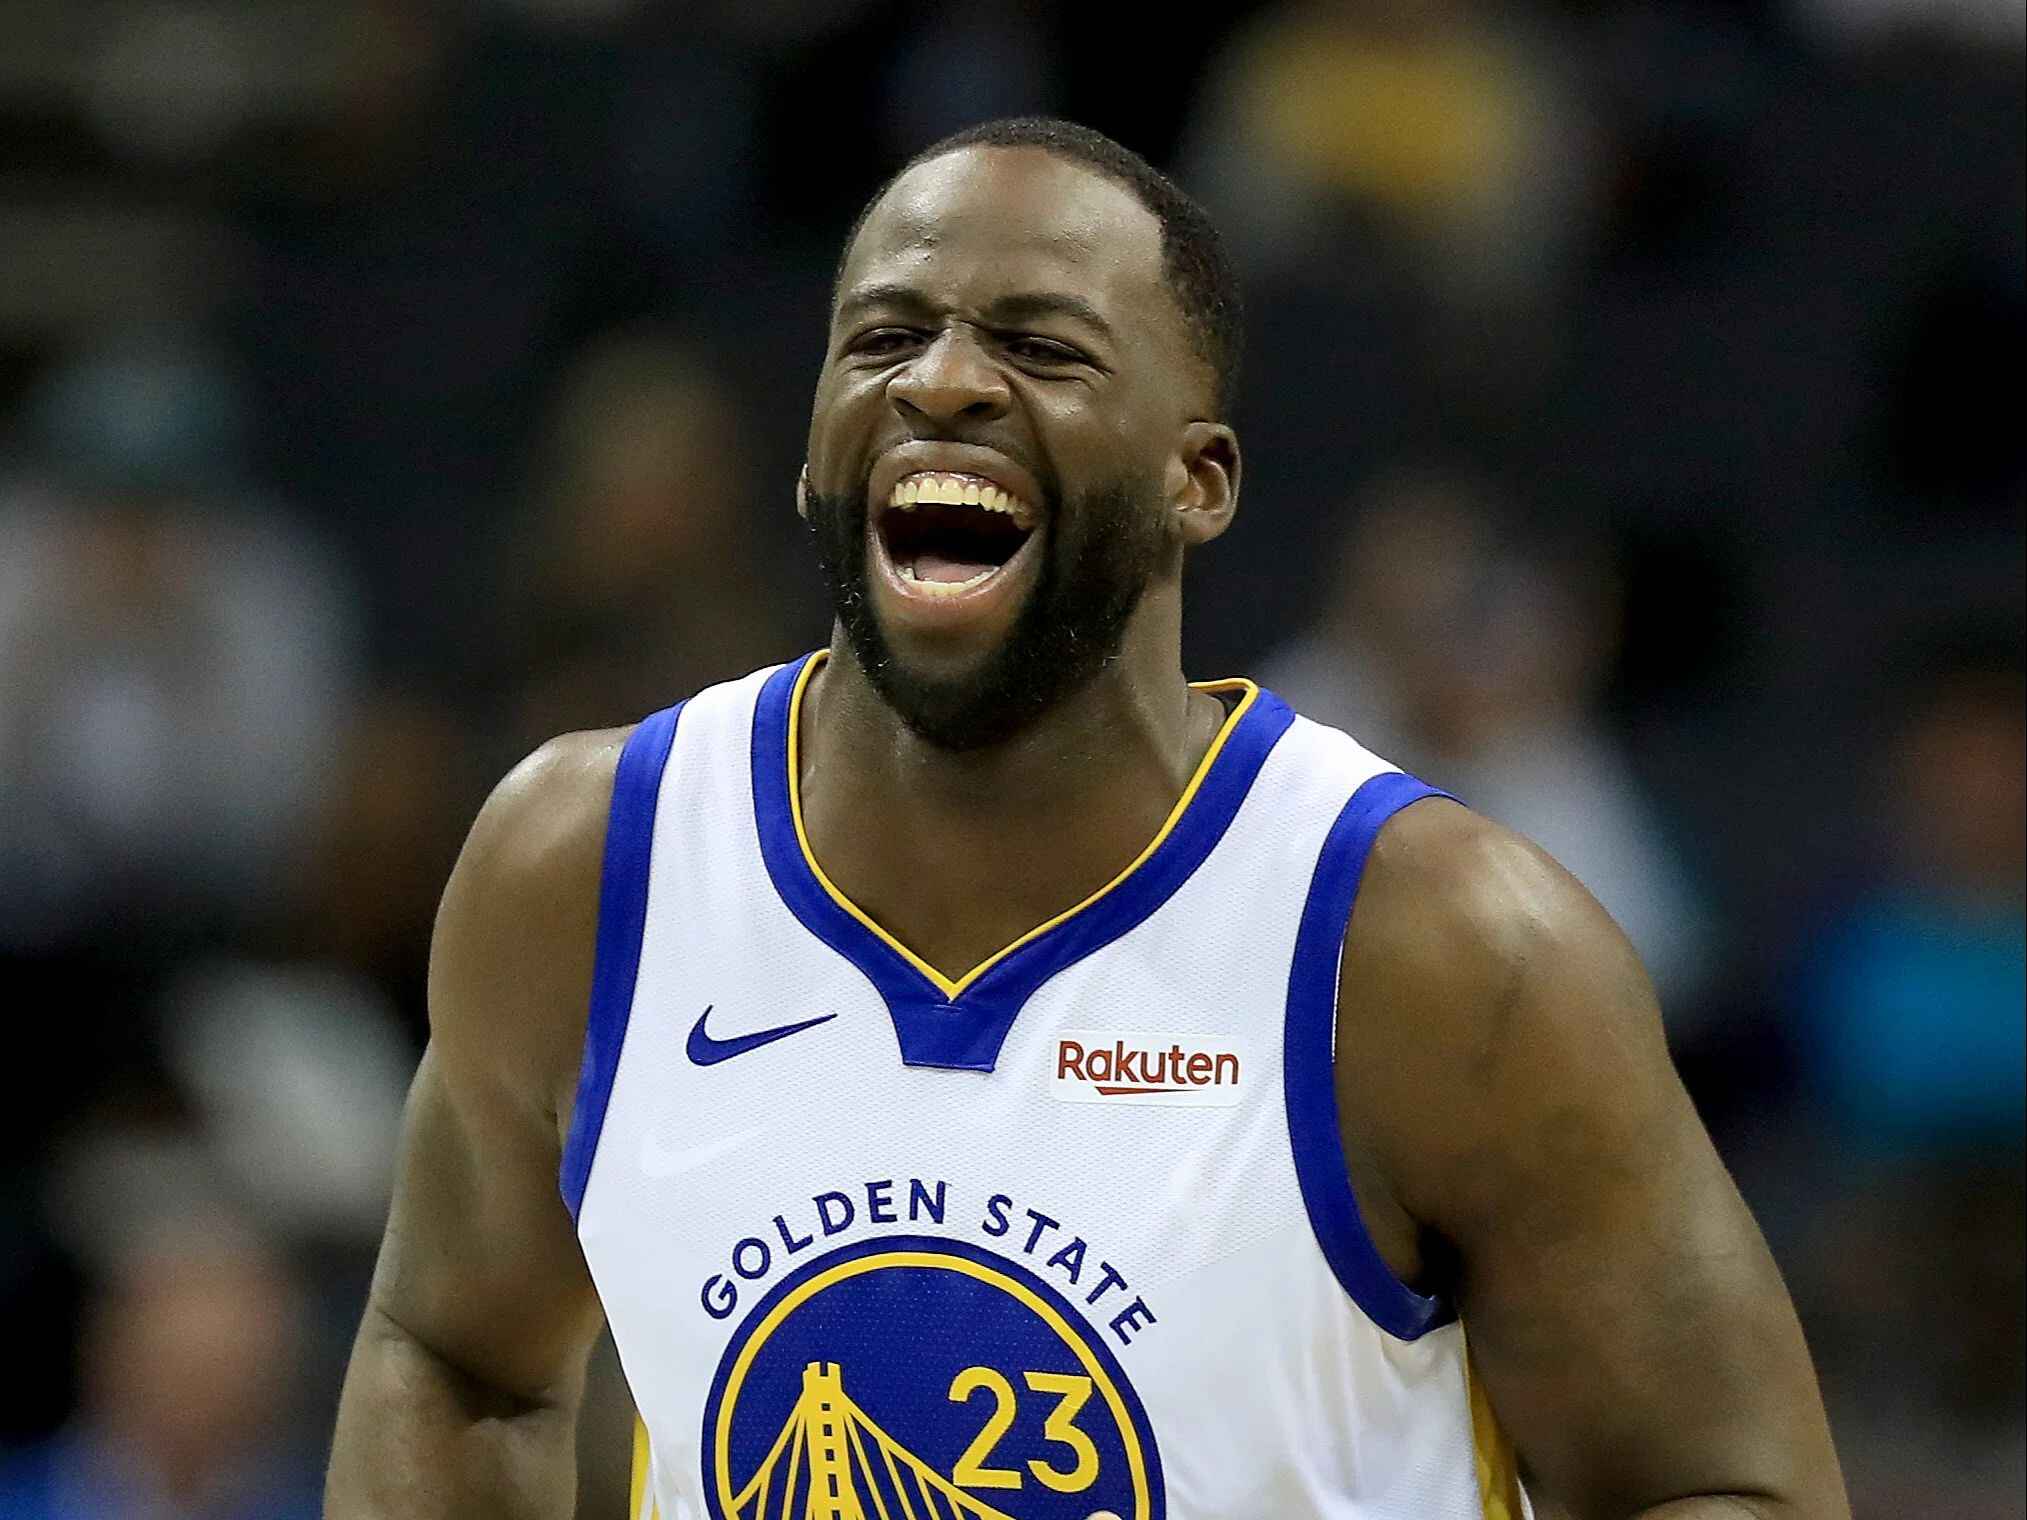 draymond-green-suspended-indefinitely-by-nba-for-unsportsmanlike-conduct